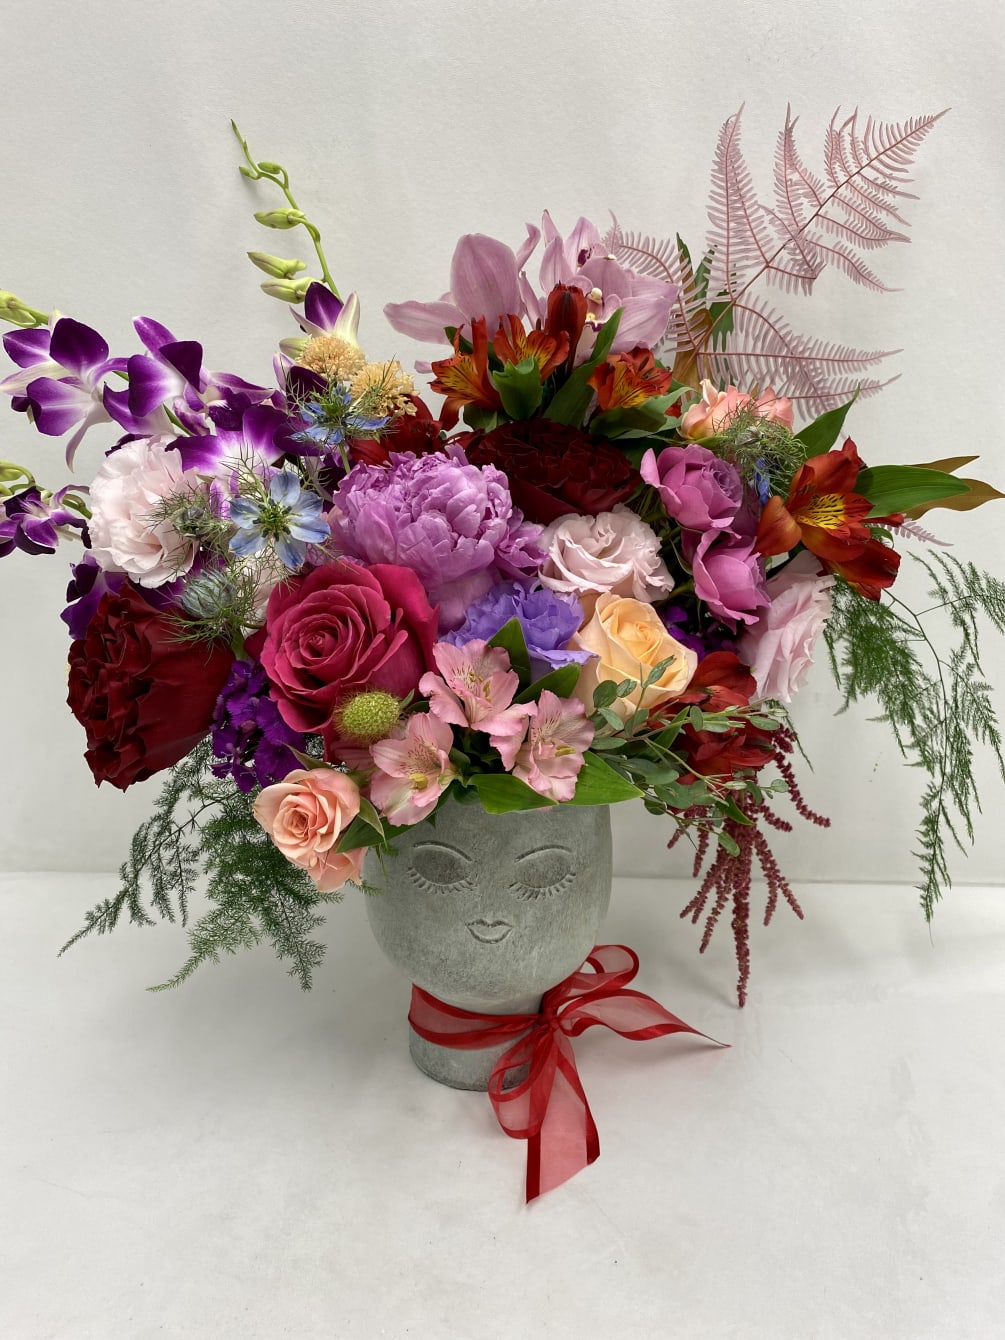 Very unique, Colorful  and stylish flower arrangement  for that Pretty